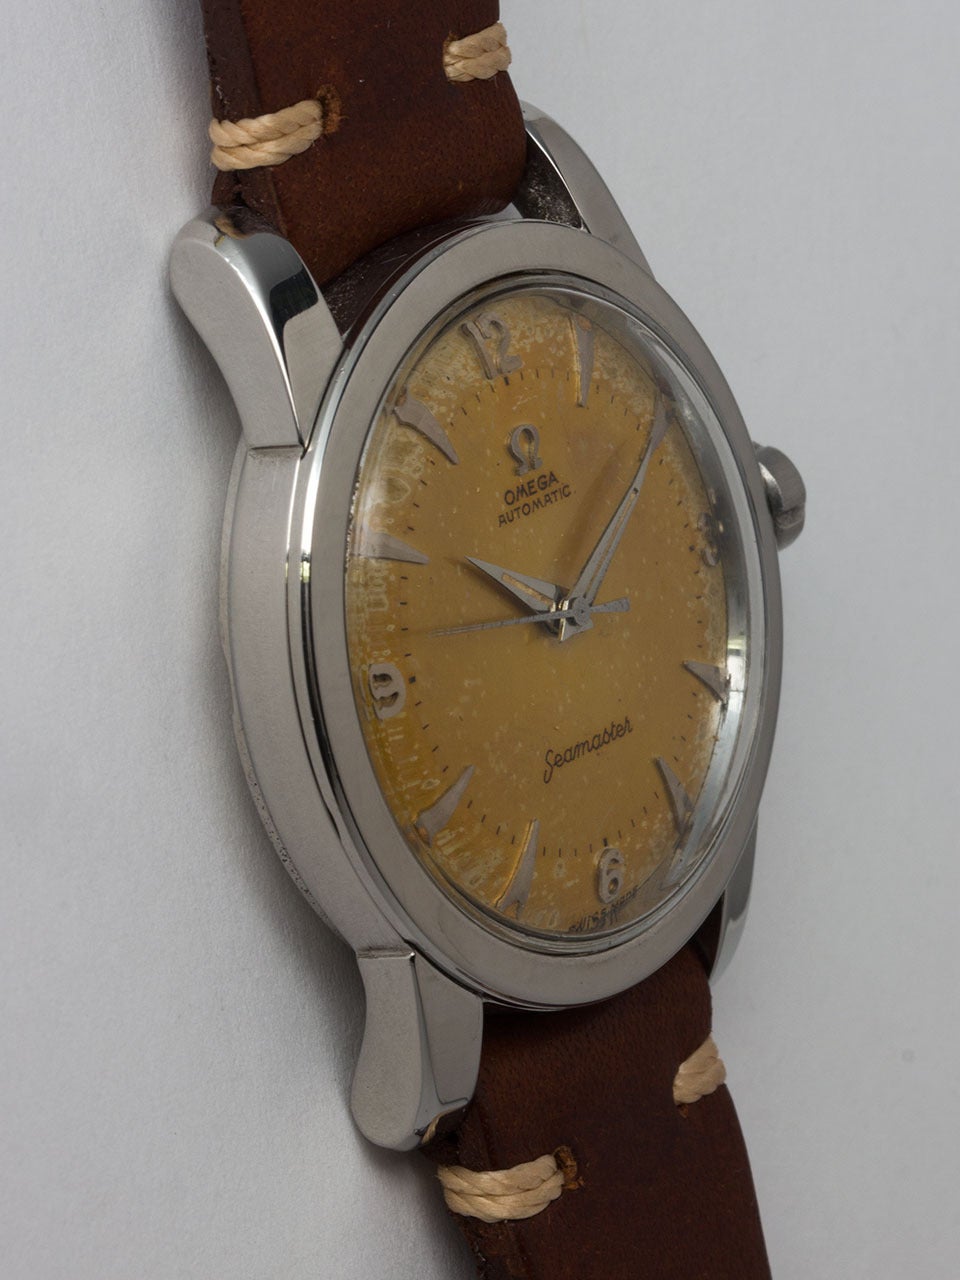 Omega Stainless Steel Seamaster Automatic Wristwatch ref # C2577-9SC movement serial #13.5 million circa 1966. Case measuring 34 x 42mm. Featuring very pleasing original warm golden patina dial with raised tapered indexes and hands. Powered by